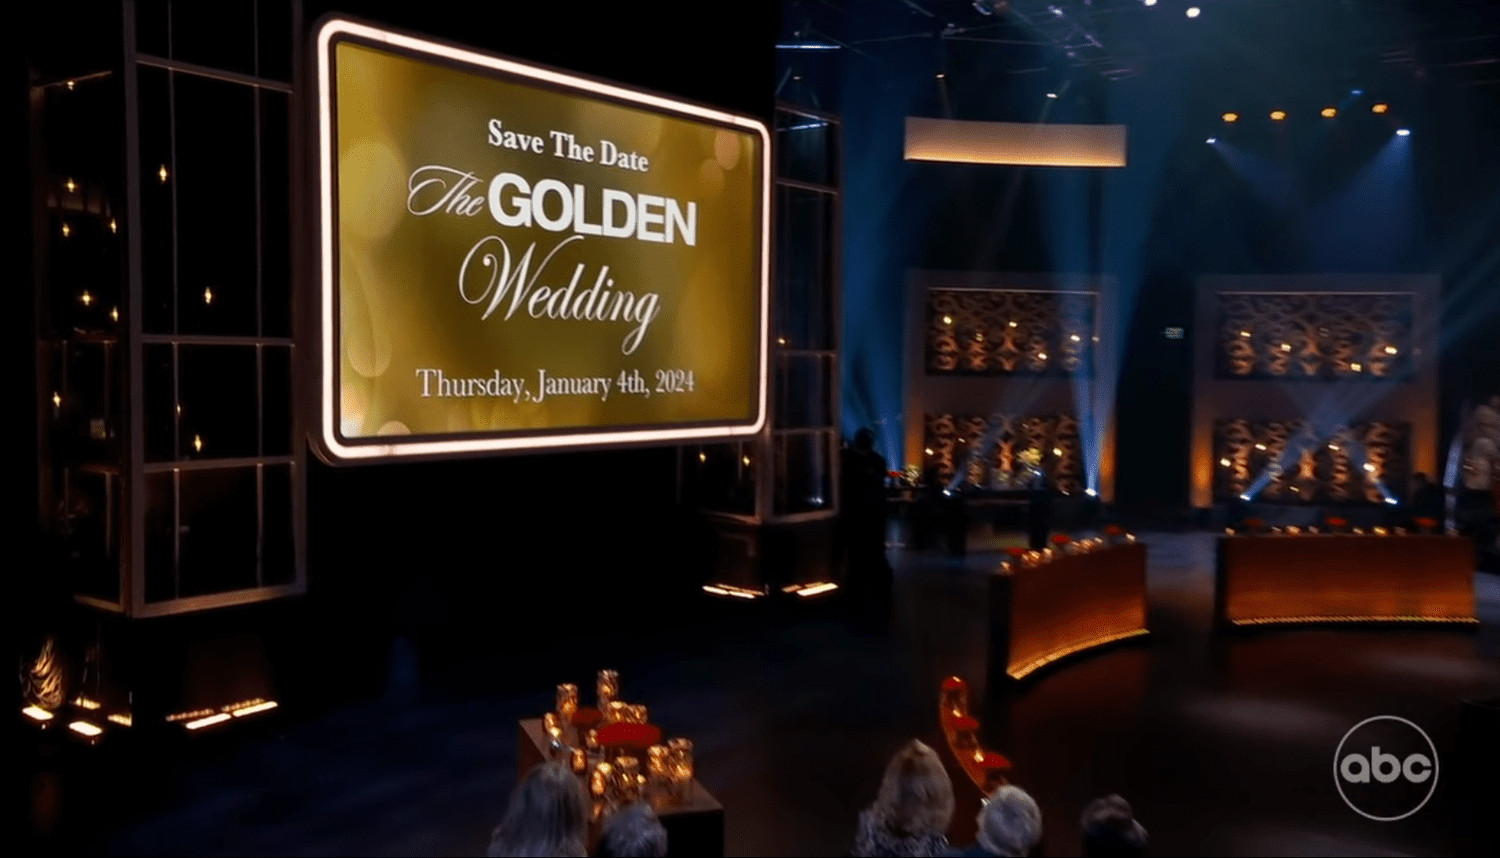 Save the date for 'The Golden Wedding'